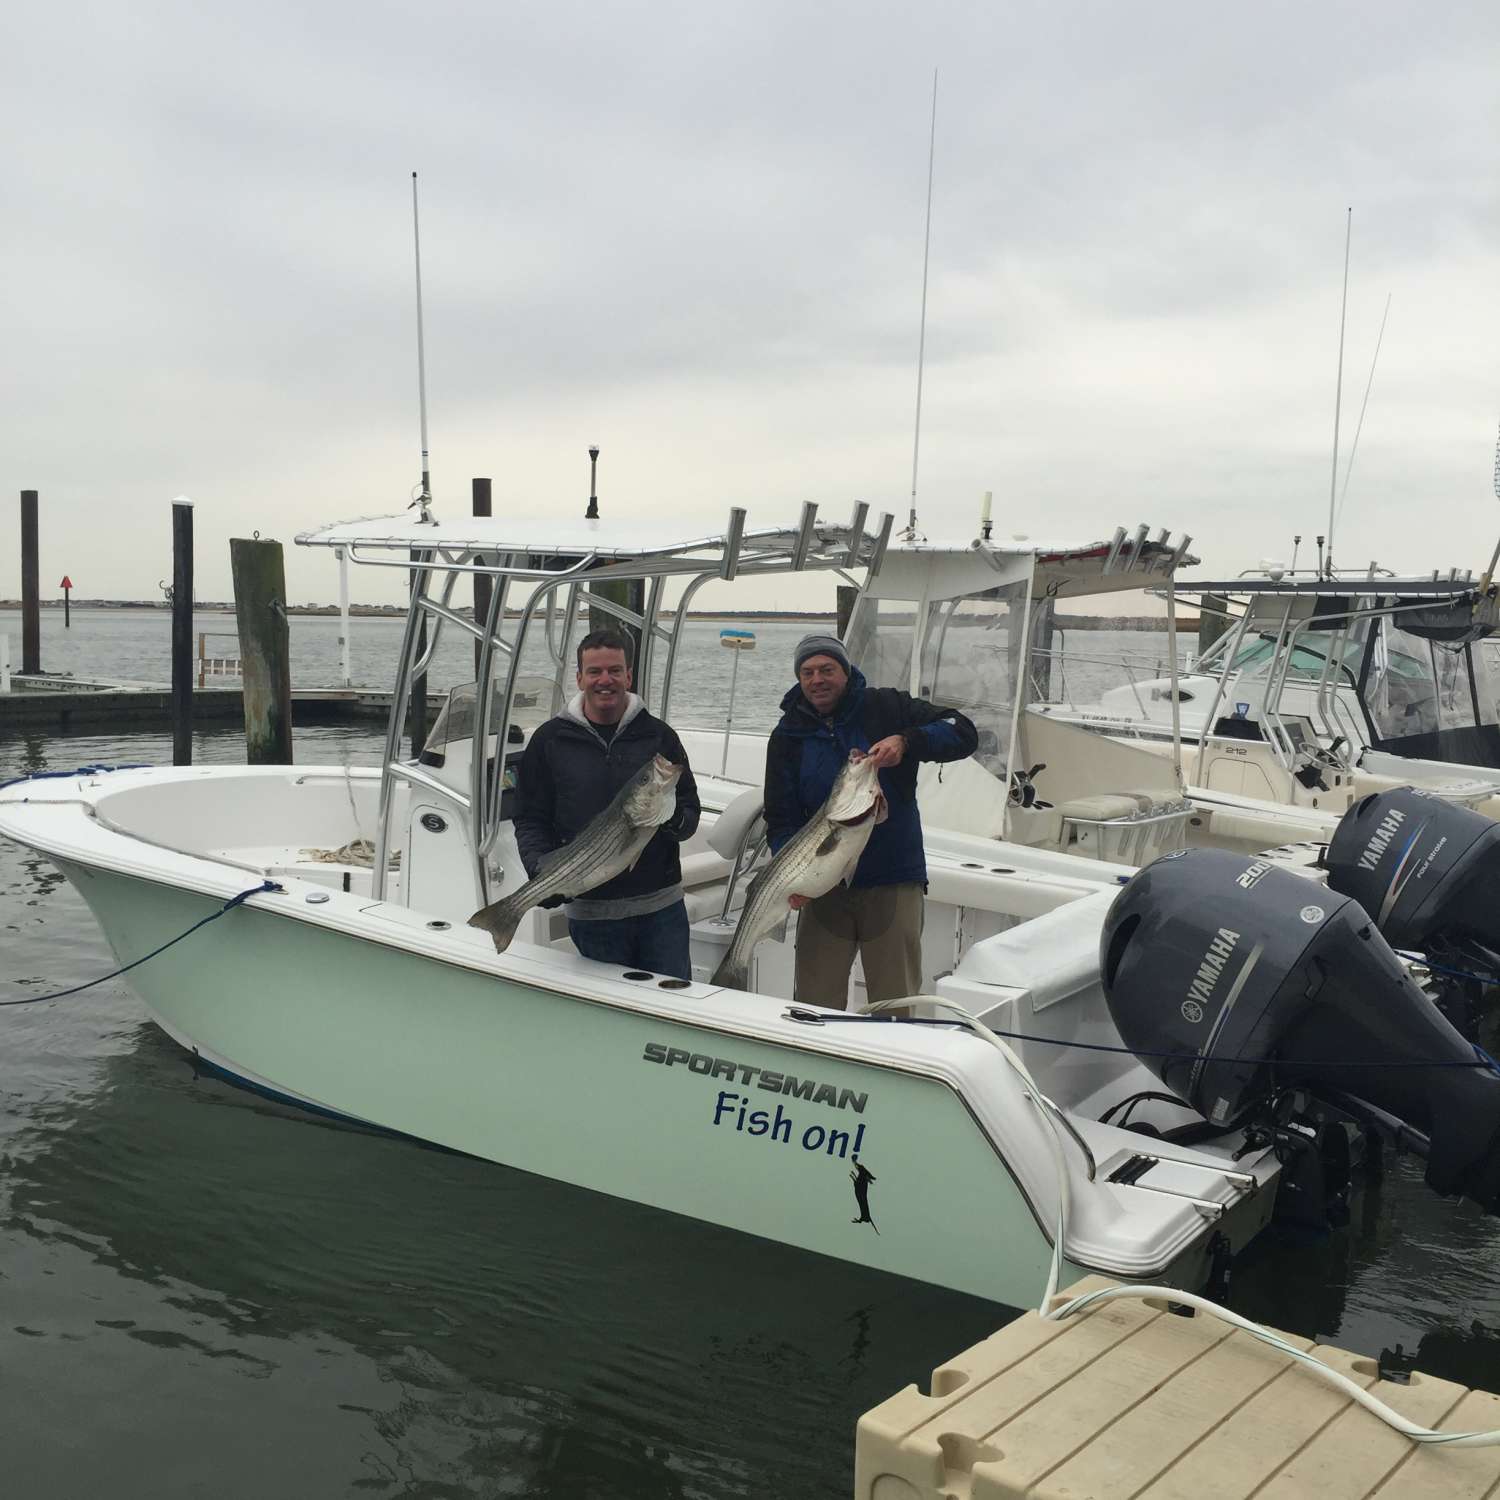 Sea Isle City, New Jersey. Boat is the brochure boat for 23 Open. 35" and 40" Stripers caught 11/22/15 off...